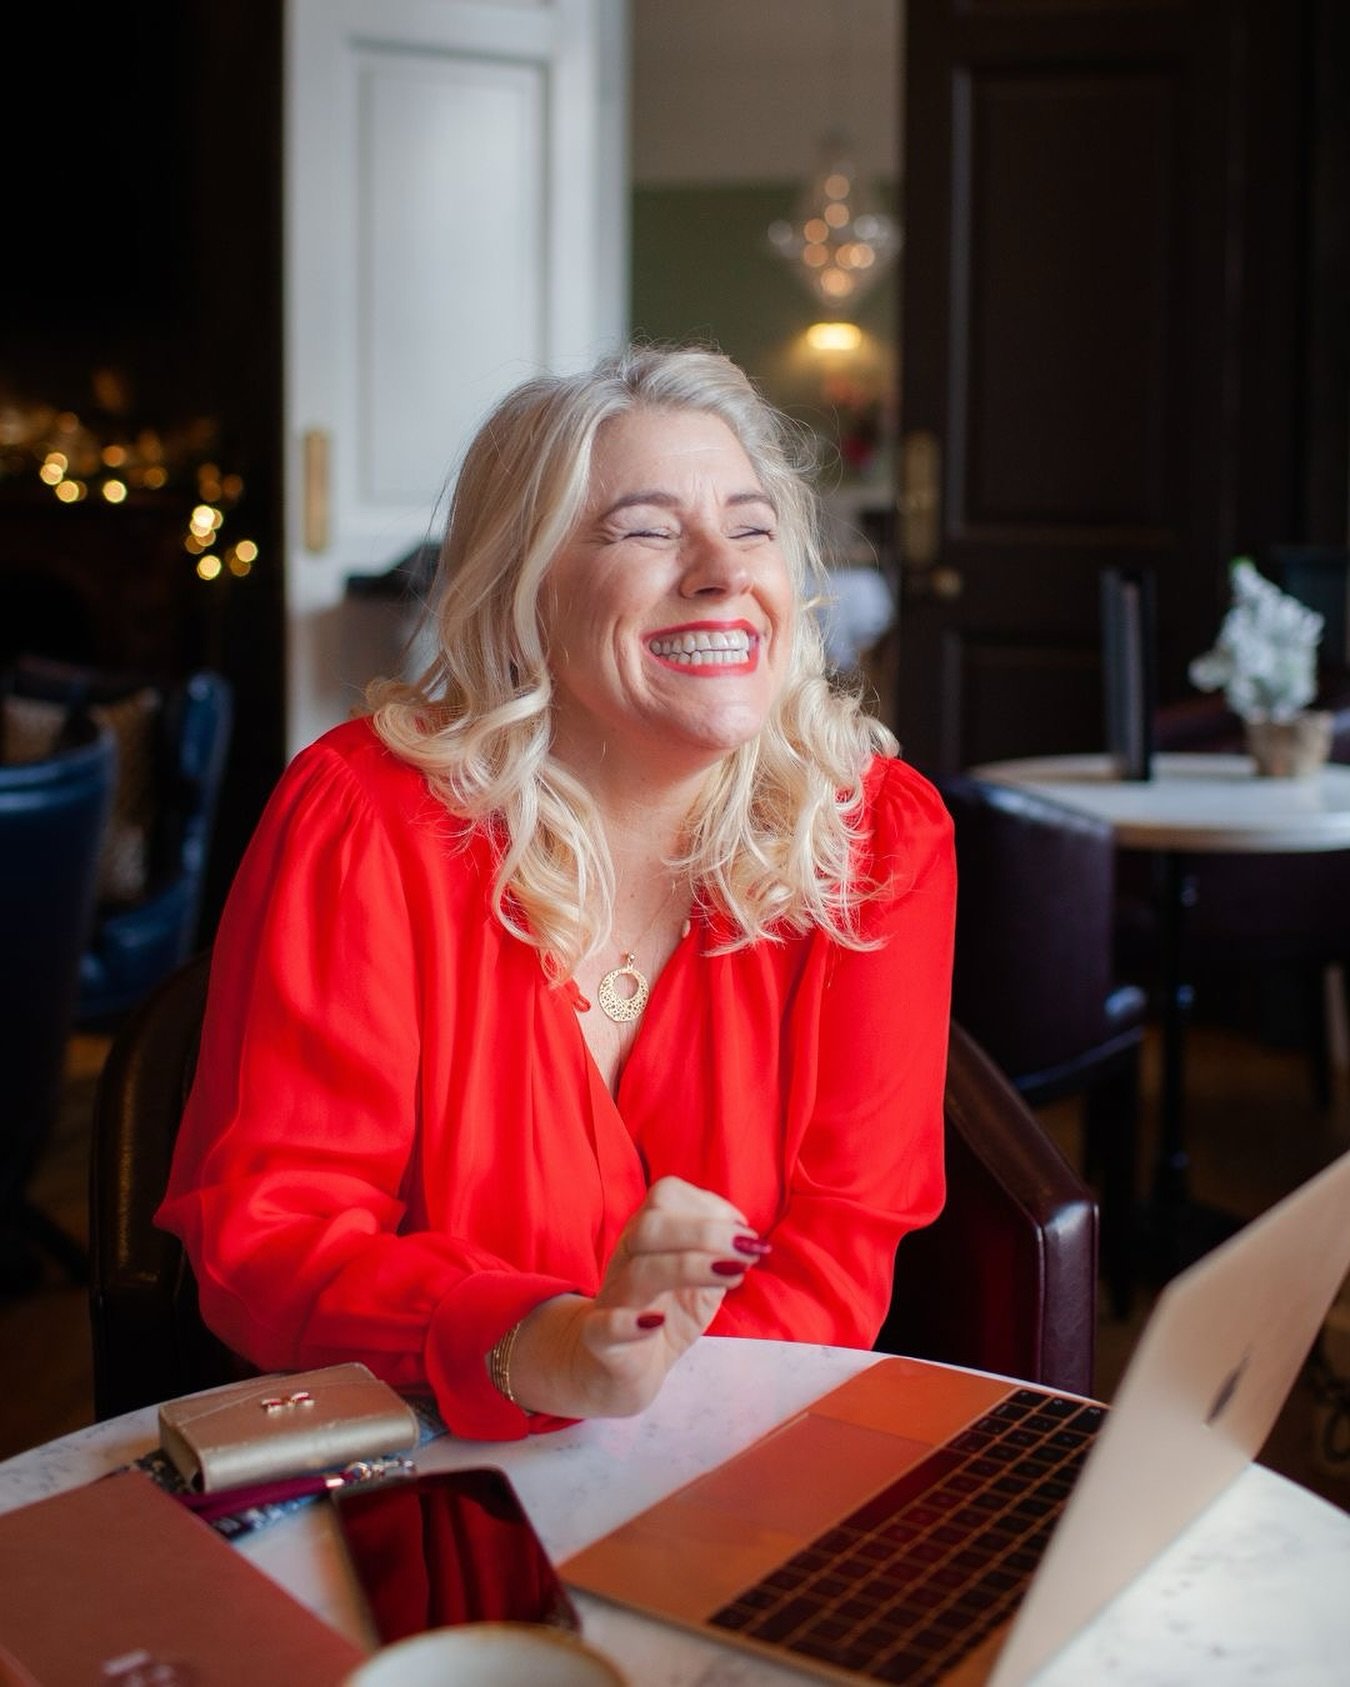 This image was a hit!
My fabulous client Sarah from @stylish_socials and @abfabimage posted this on launch day of her event last week.
It shows her joy and excitement and it got so many lovely comments from people who know that this is a real represe